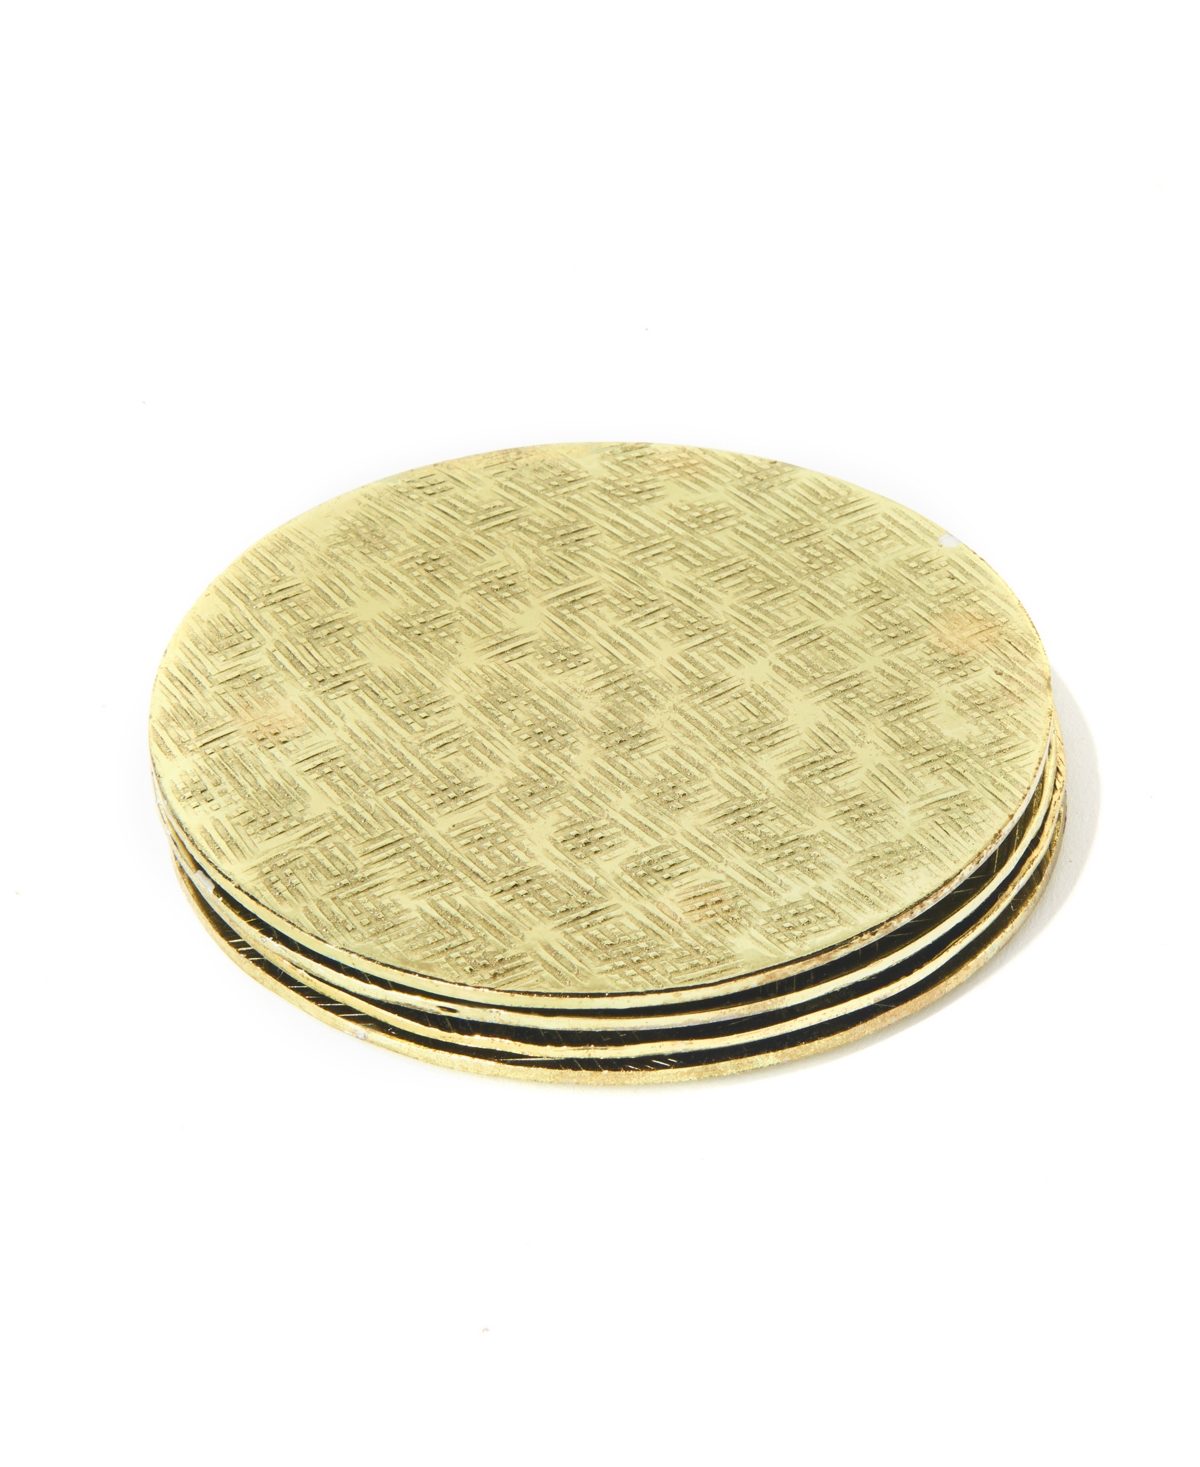 American Atelier Round Coasters Set, 4 Piece In Gold